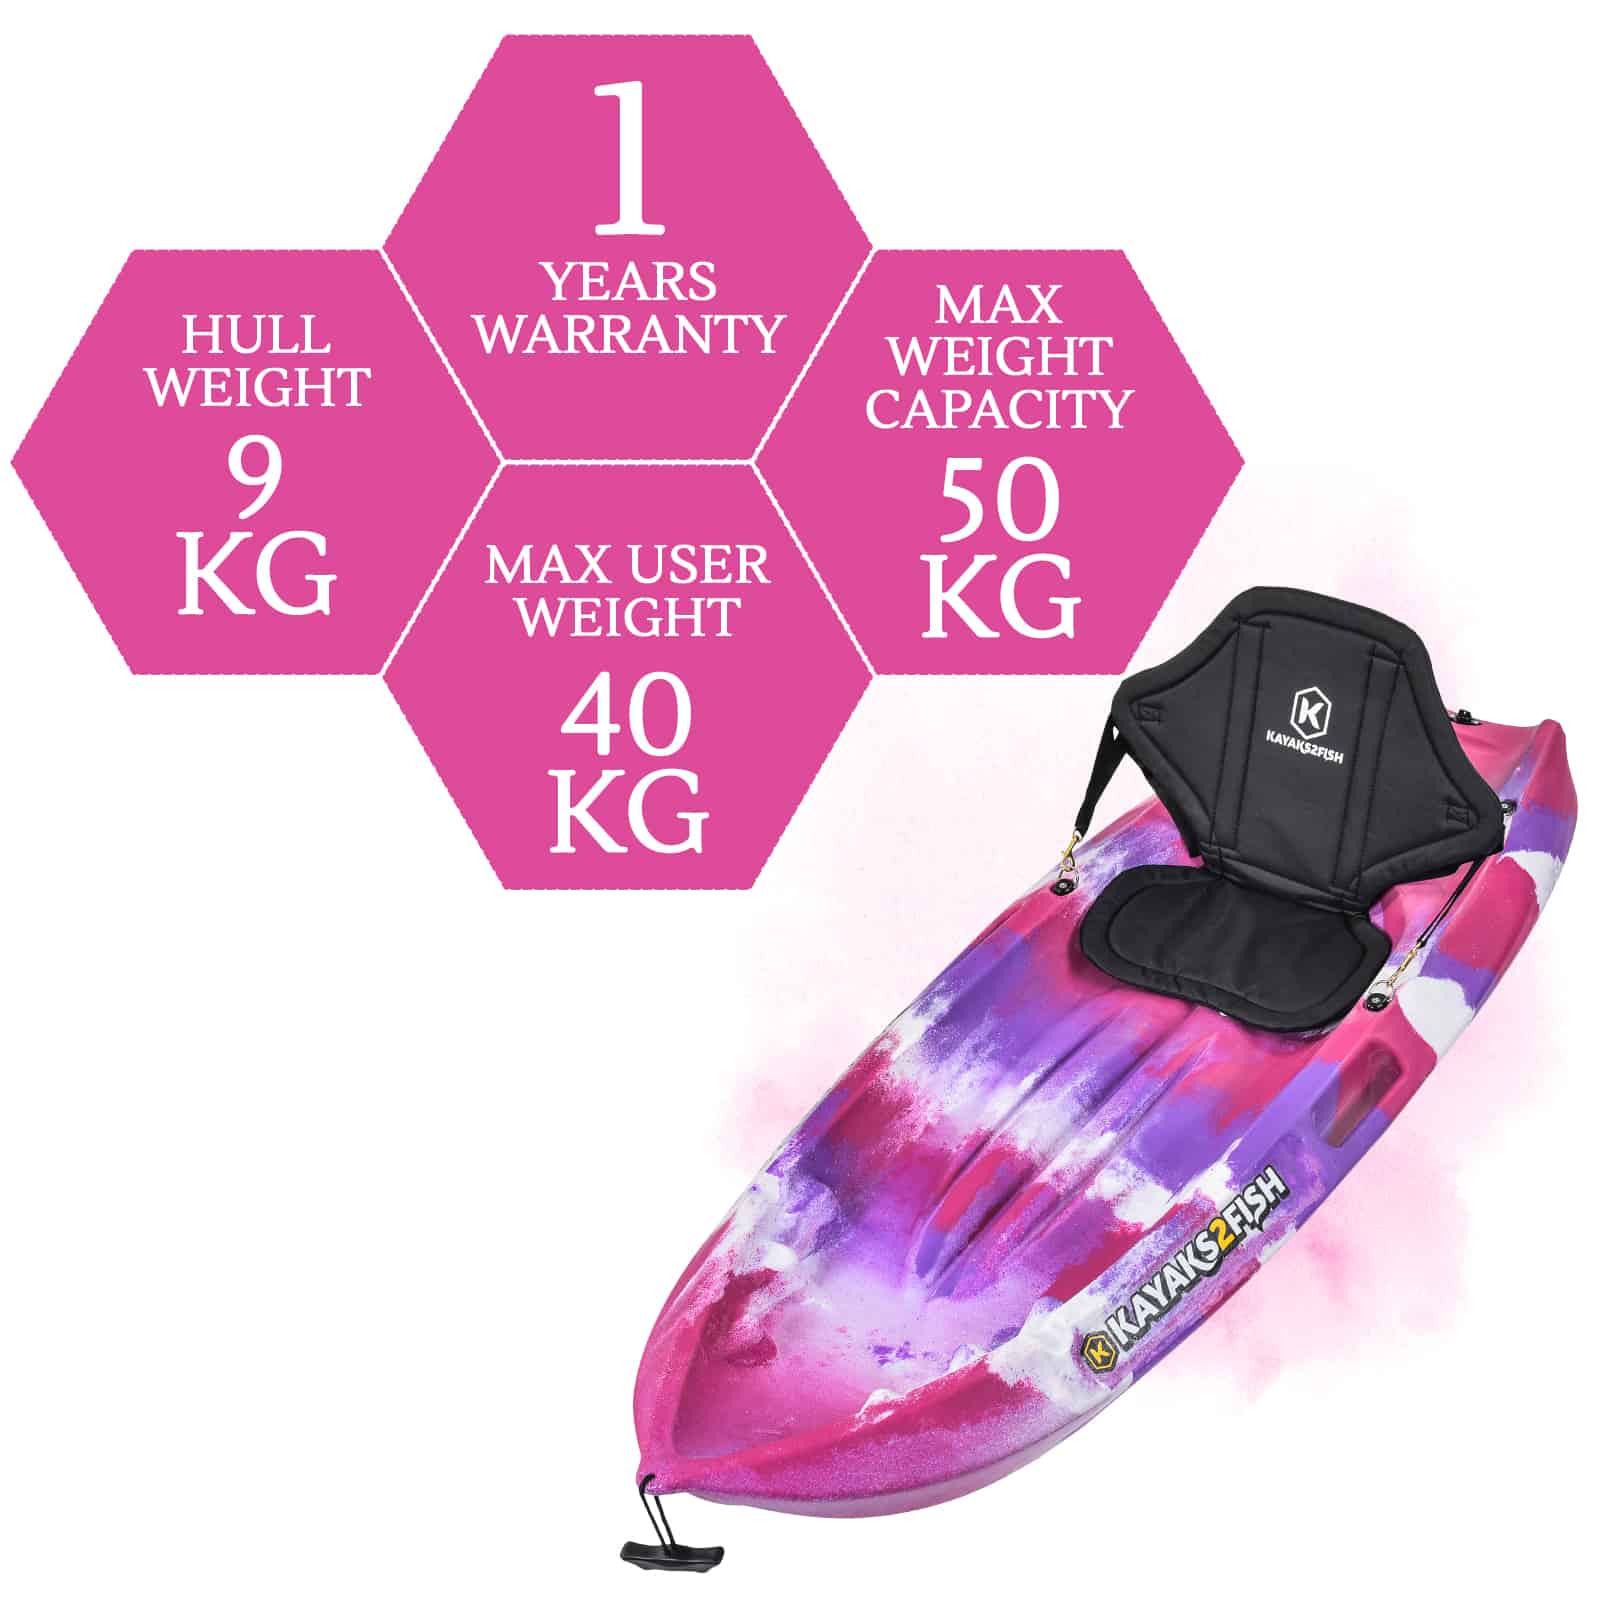 K2FW-PUFFIN-PINKCAMO specifications